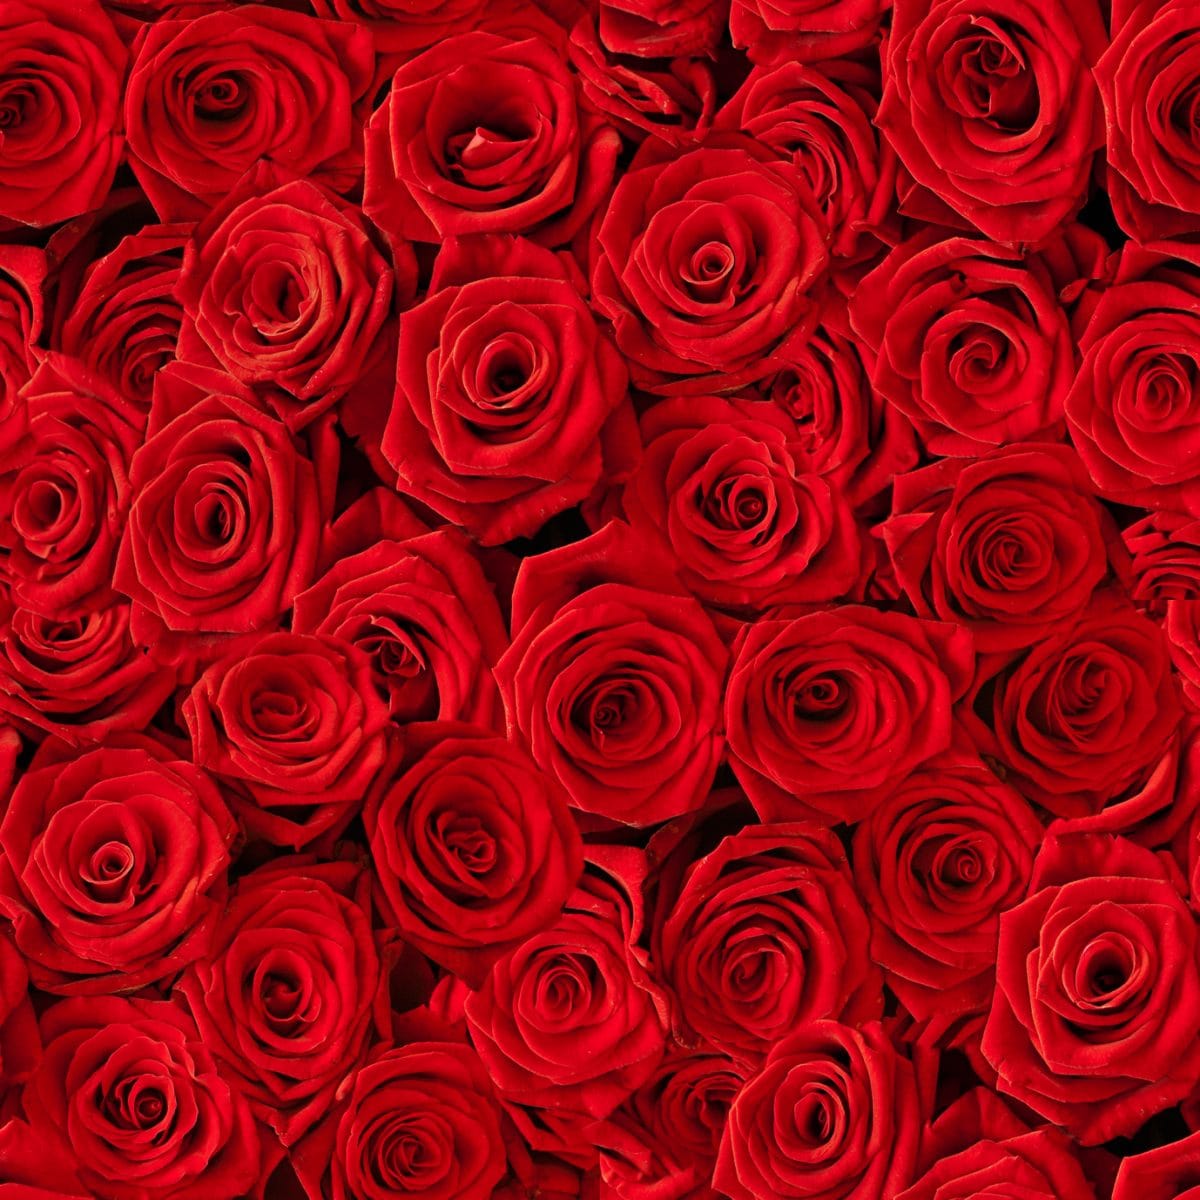 Seamless roses background